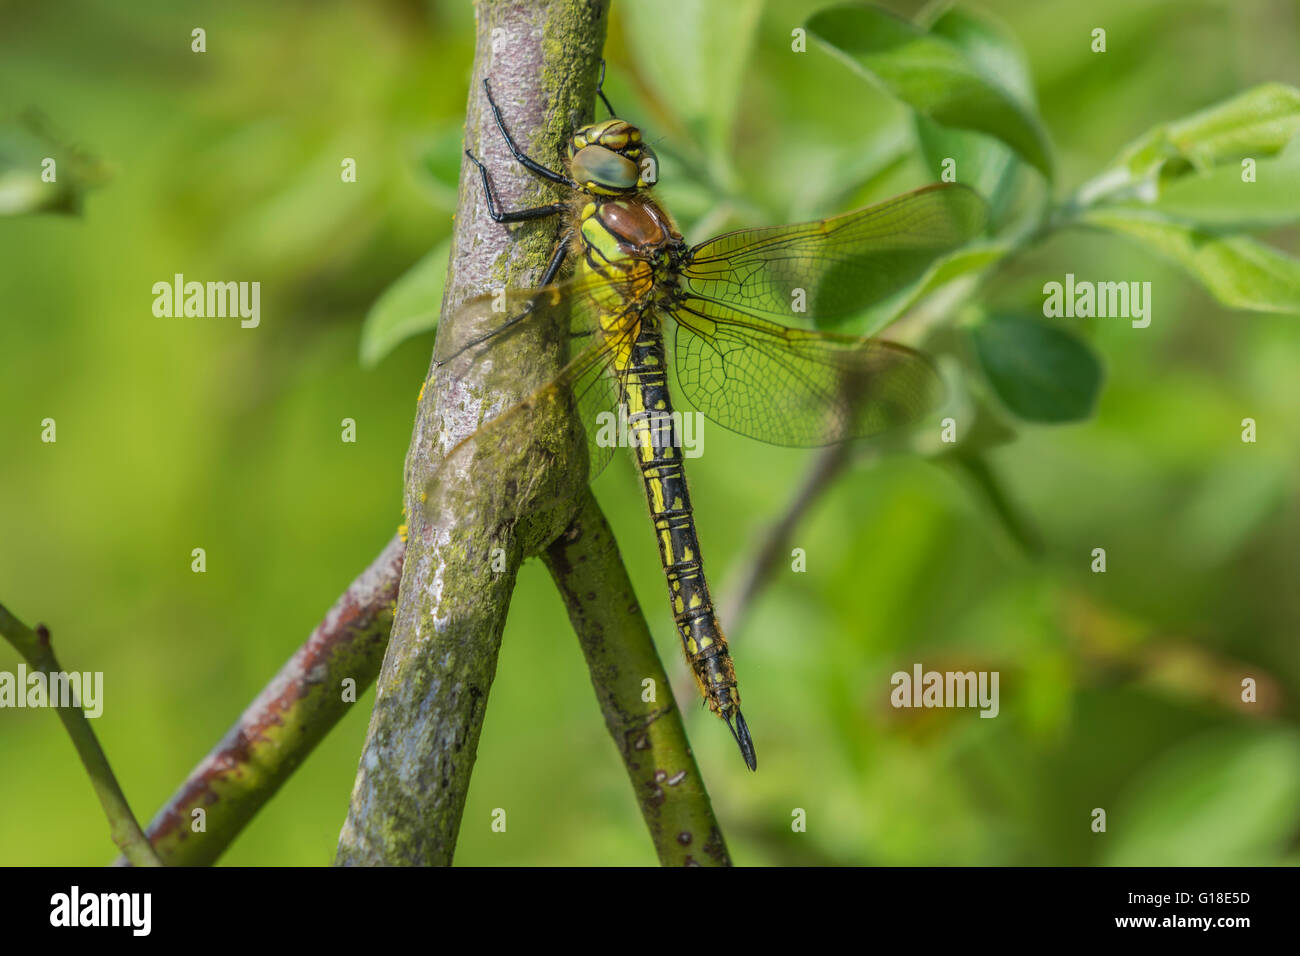 Hairy femelle Hawker Dragonfly resting on a branch Banque D'Images